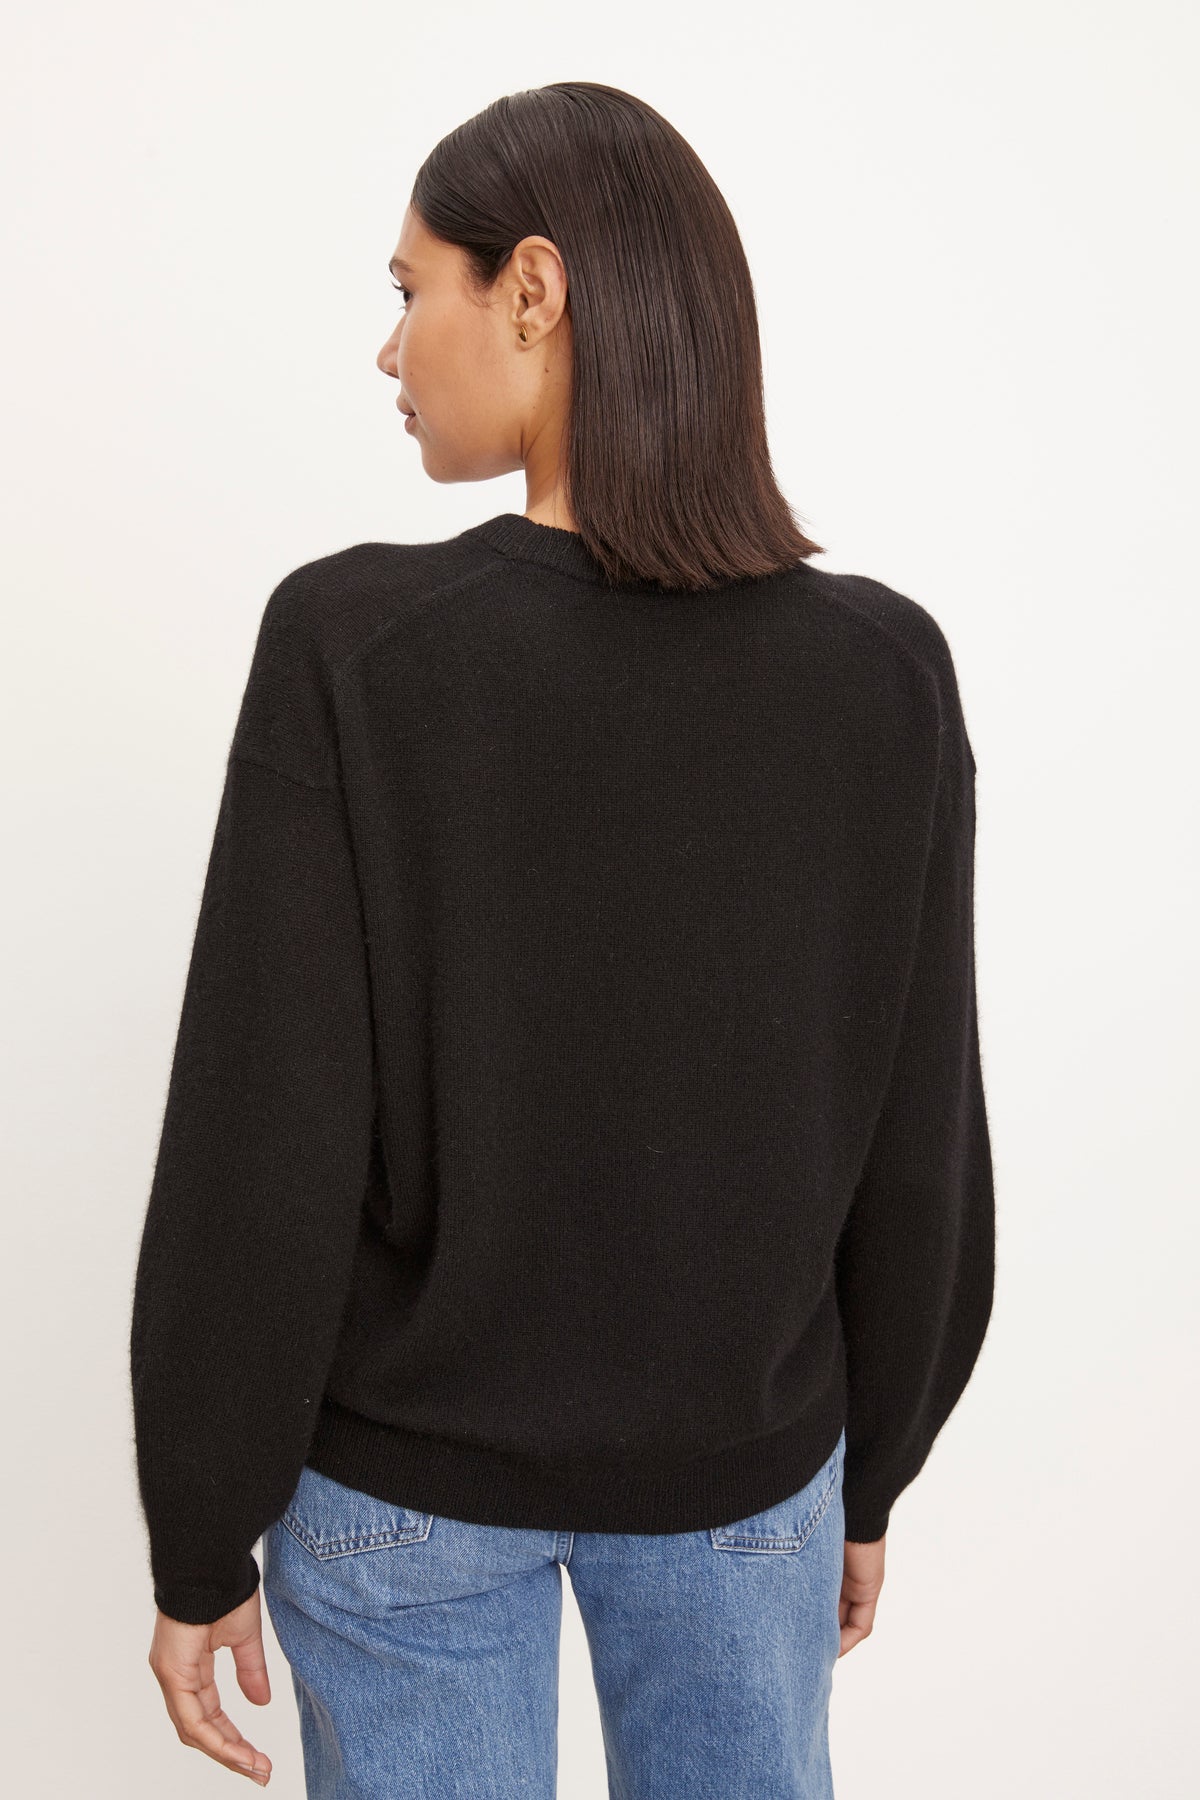 The back view of a woman wearing a Velvet by Graham & Spencer BRYNNE CASHMERE CREW NECK SWEATER and jeans.-26883604250817